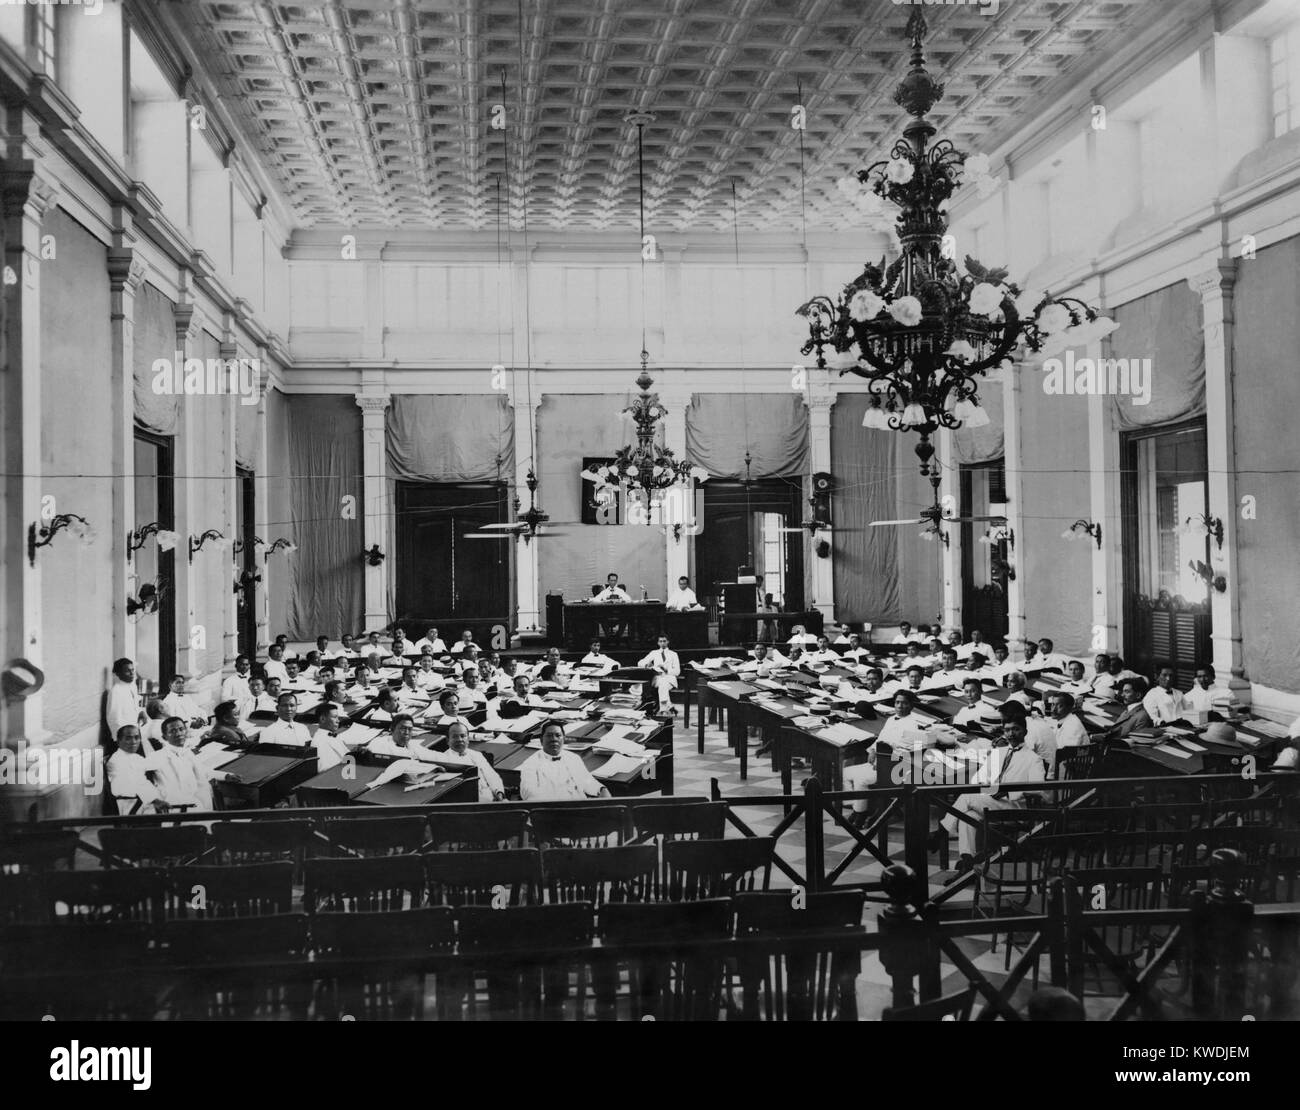 The Philippines Assembly in session, c. 1907. The popularly elected legislature was established by the US Congress Philippine Organic Act of 1902 as the lower house of government, subordinated to the US appointed Philippine Commission. The Philippine Autonomy Act of 1916 (Jones Act) replaced the Commission with an elected Philippine Senate (BSLOC 2017 10 91) Stock Photo